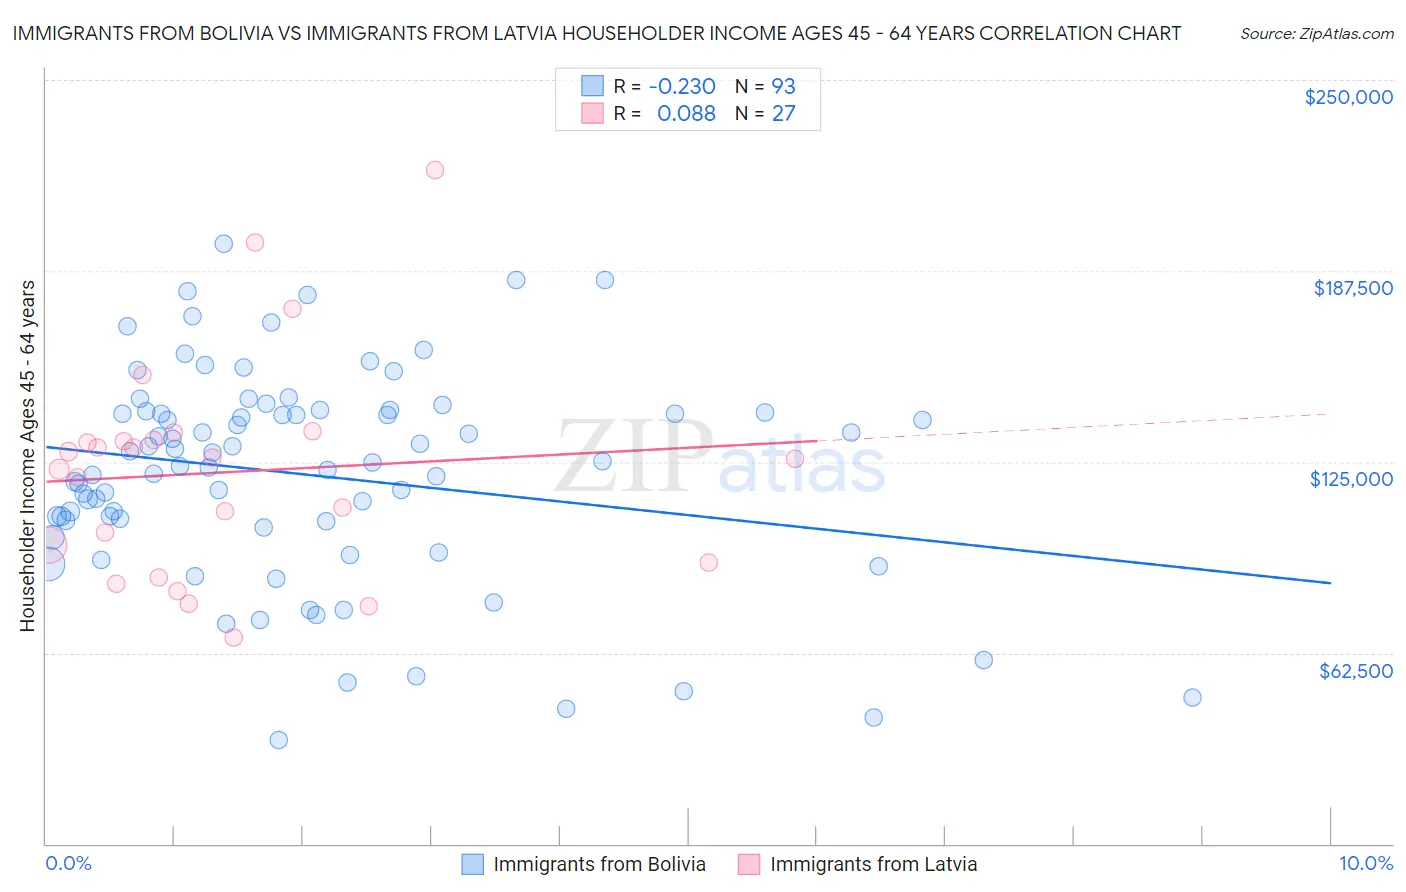 Immigrants from Bolivia vs Immigrants from Latvia Householder Income Ages 45 - 64 years